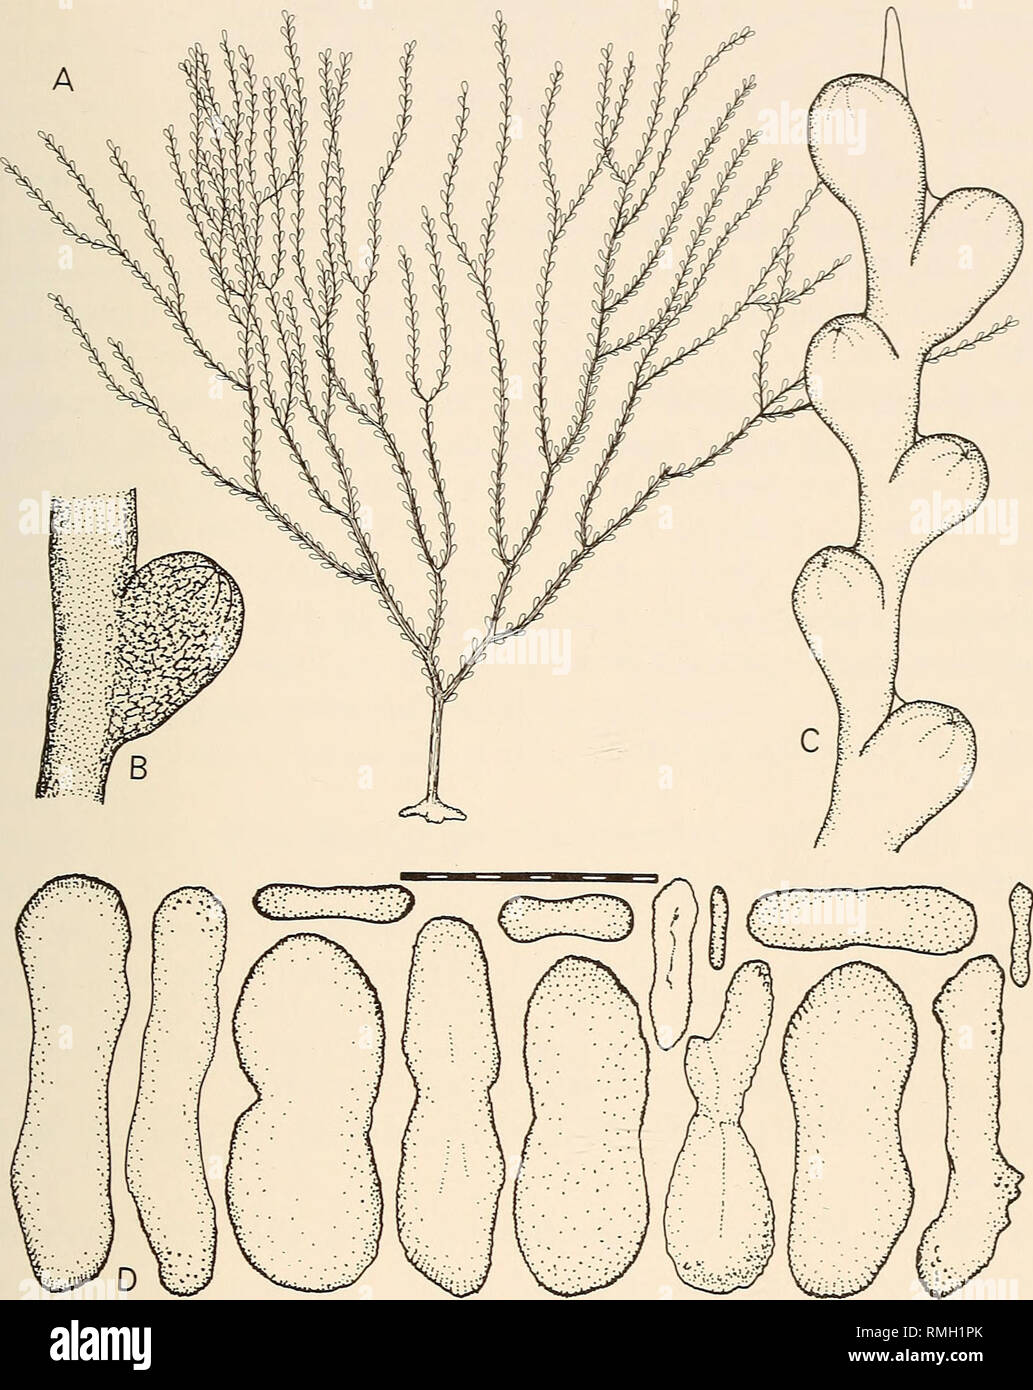 . Annals of the South African Museum = Annale van die Suid-Afrikaanse Museum. Natural history. GORGONIAN OCTOCORALS OF SOUTHERN AFRICA 269. Fig. 62. Trichogorgia flexilis Hickson, 1904. A. An entire colony, 90 mm in height. B. A single polyp 0,7 mm in length. C. Detail of a terminal branch 3,5 mm long. D. Polyp sclerites. Scale bar = 0,1 mm. Description The colonies examined range in length from 70 mm to 90 mm. Colonies are planar, branching is dichotomous, relatively sparse from a single basal stem. Polyps are densely arranged in two rows along each branch and are placed opposite or alternate Stock Photo